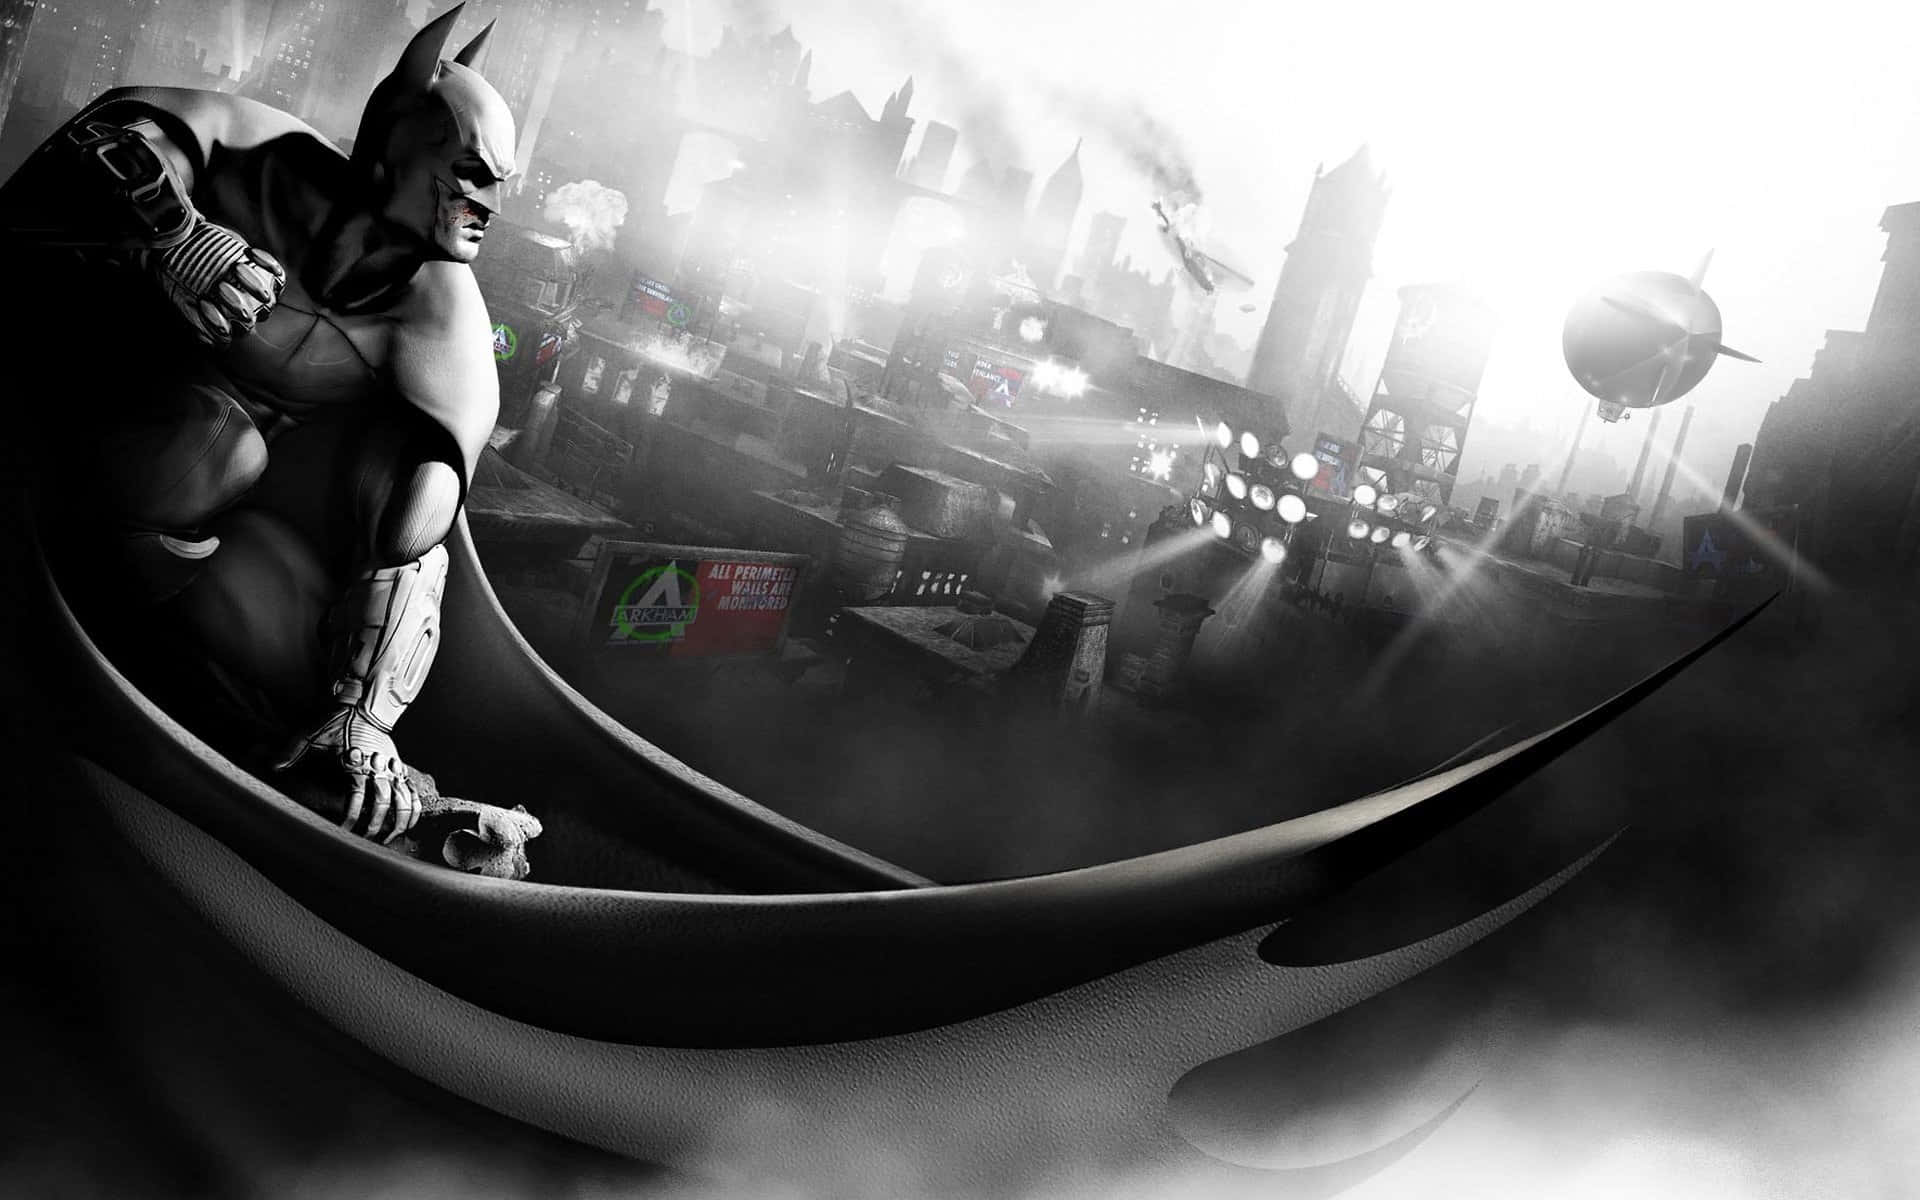 Batman stands tall, ready for action in a stylish black and white setting Wallpaper